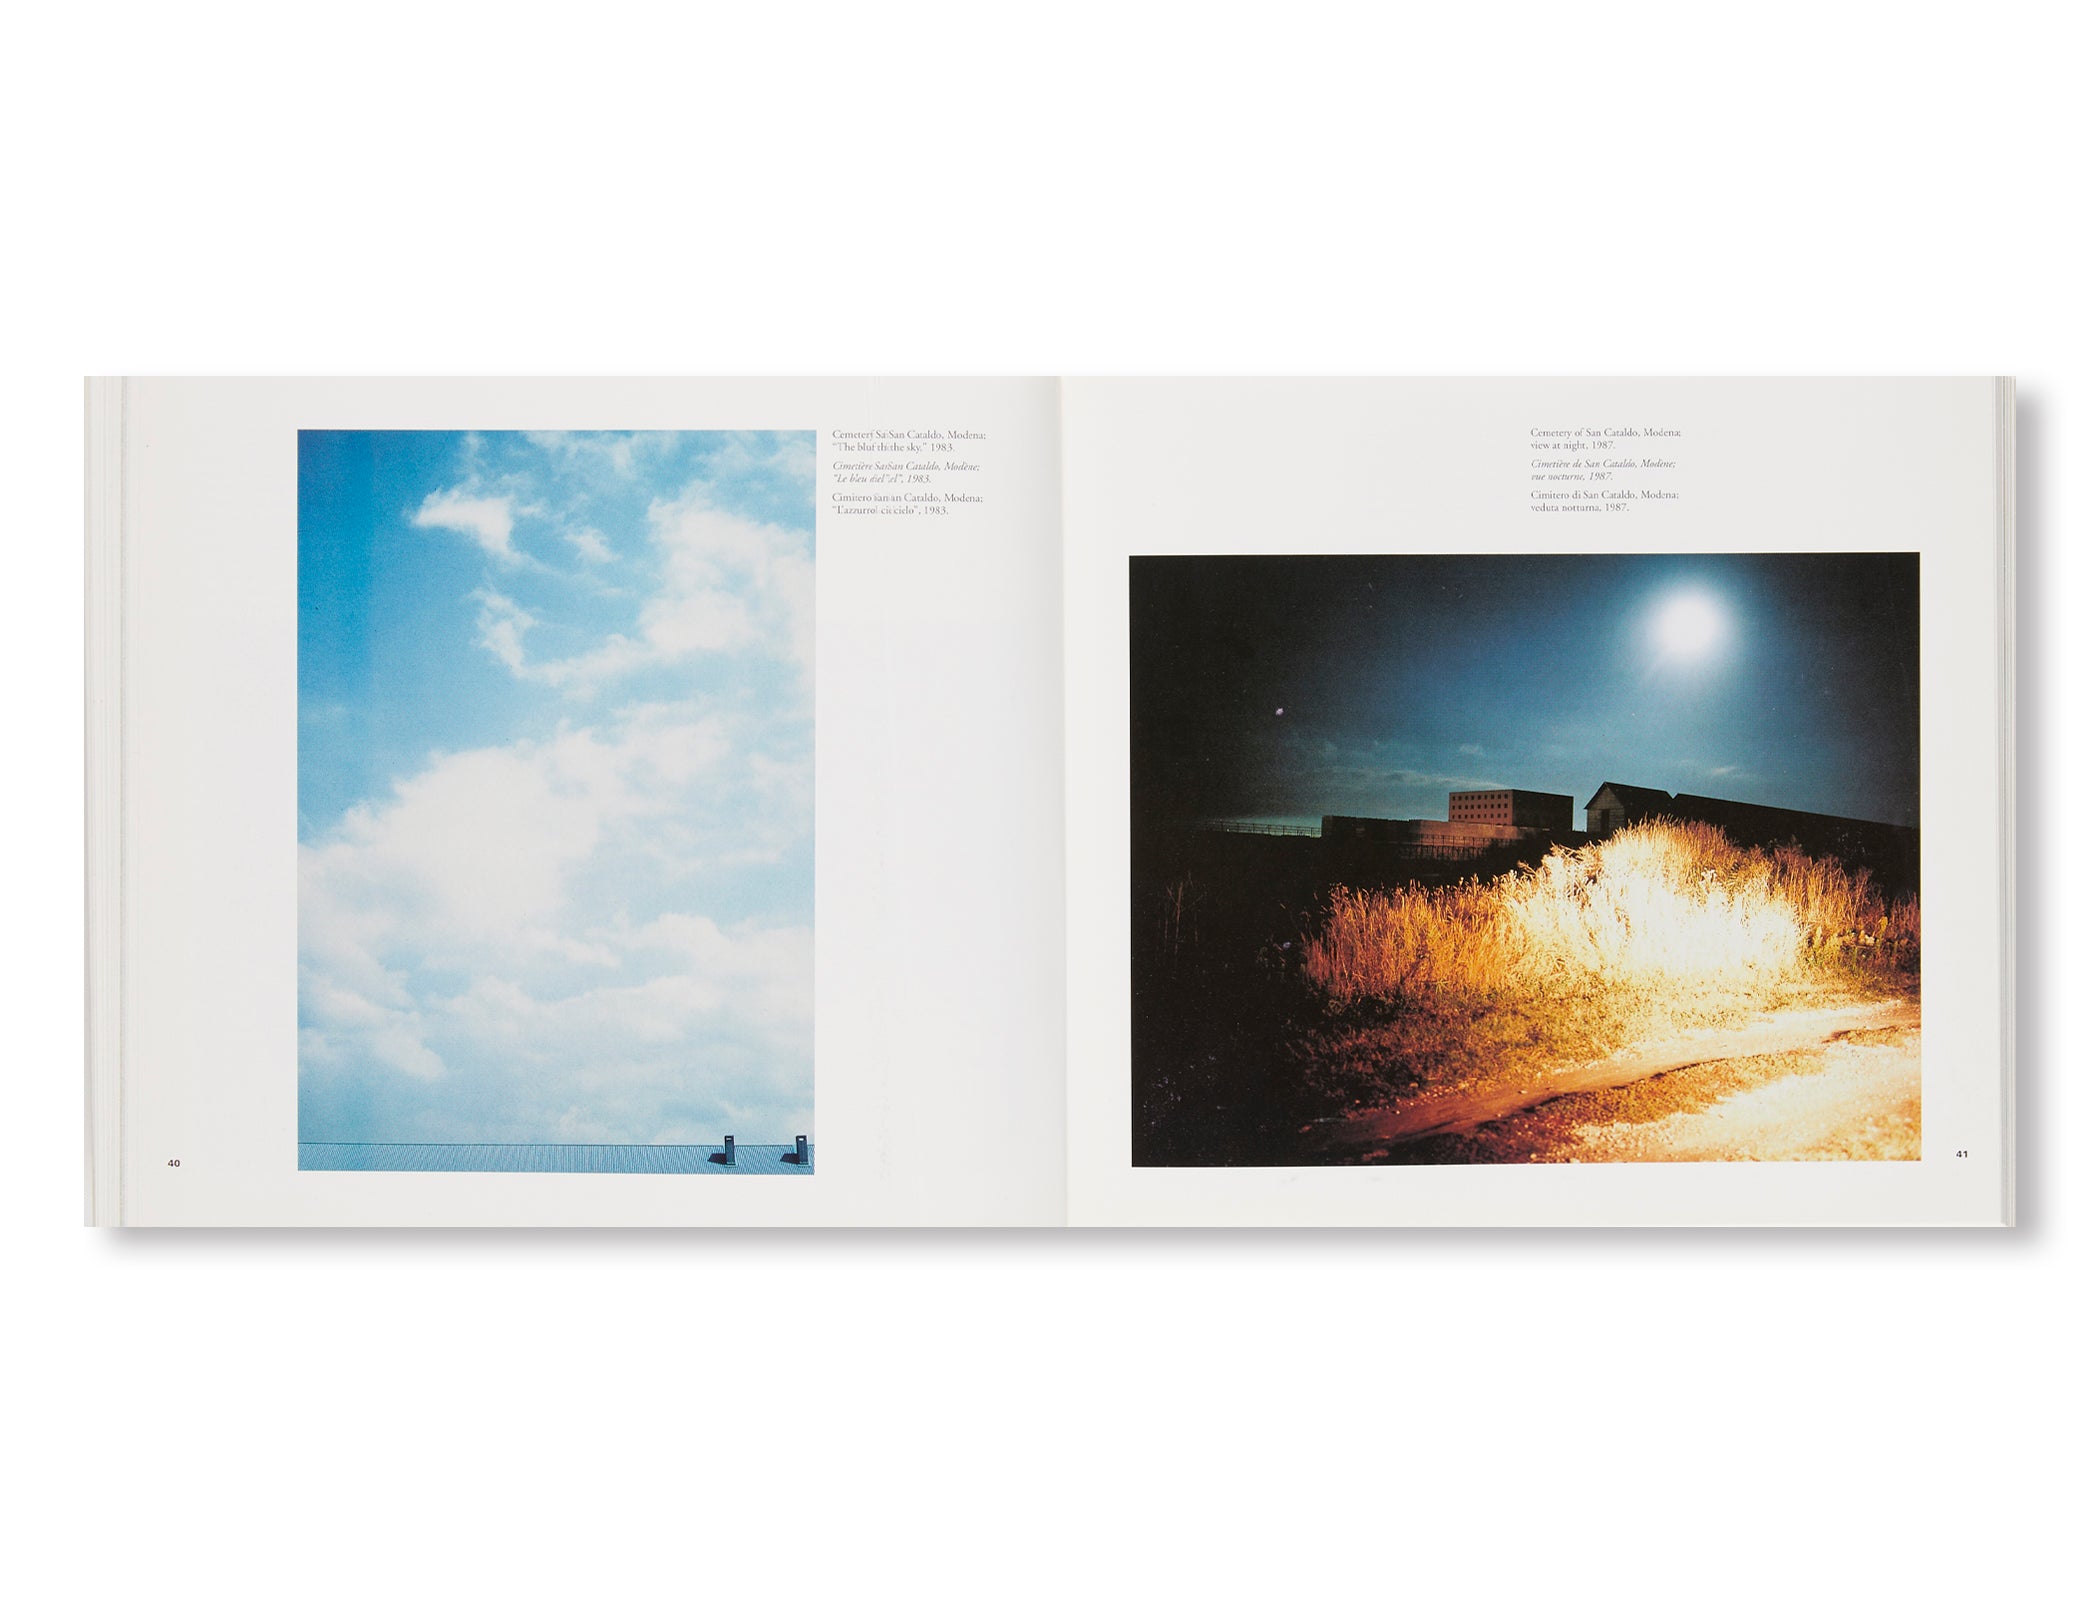 LUIGI GHIRRI/ALDO ROSSI: THINGS WHICH ARE ONLY THEMSELVES by Luigi Ghirri, Aldo Rossi